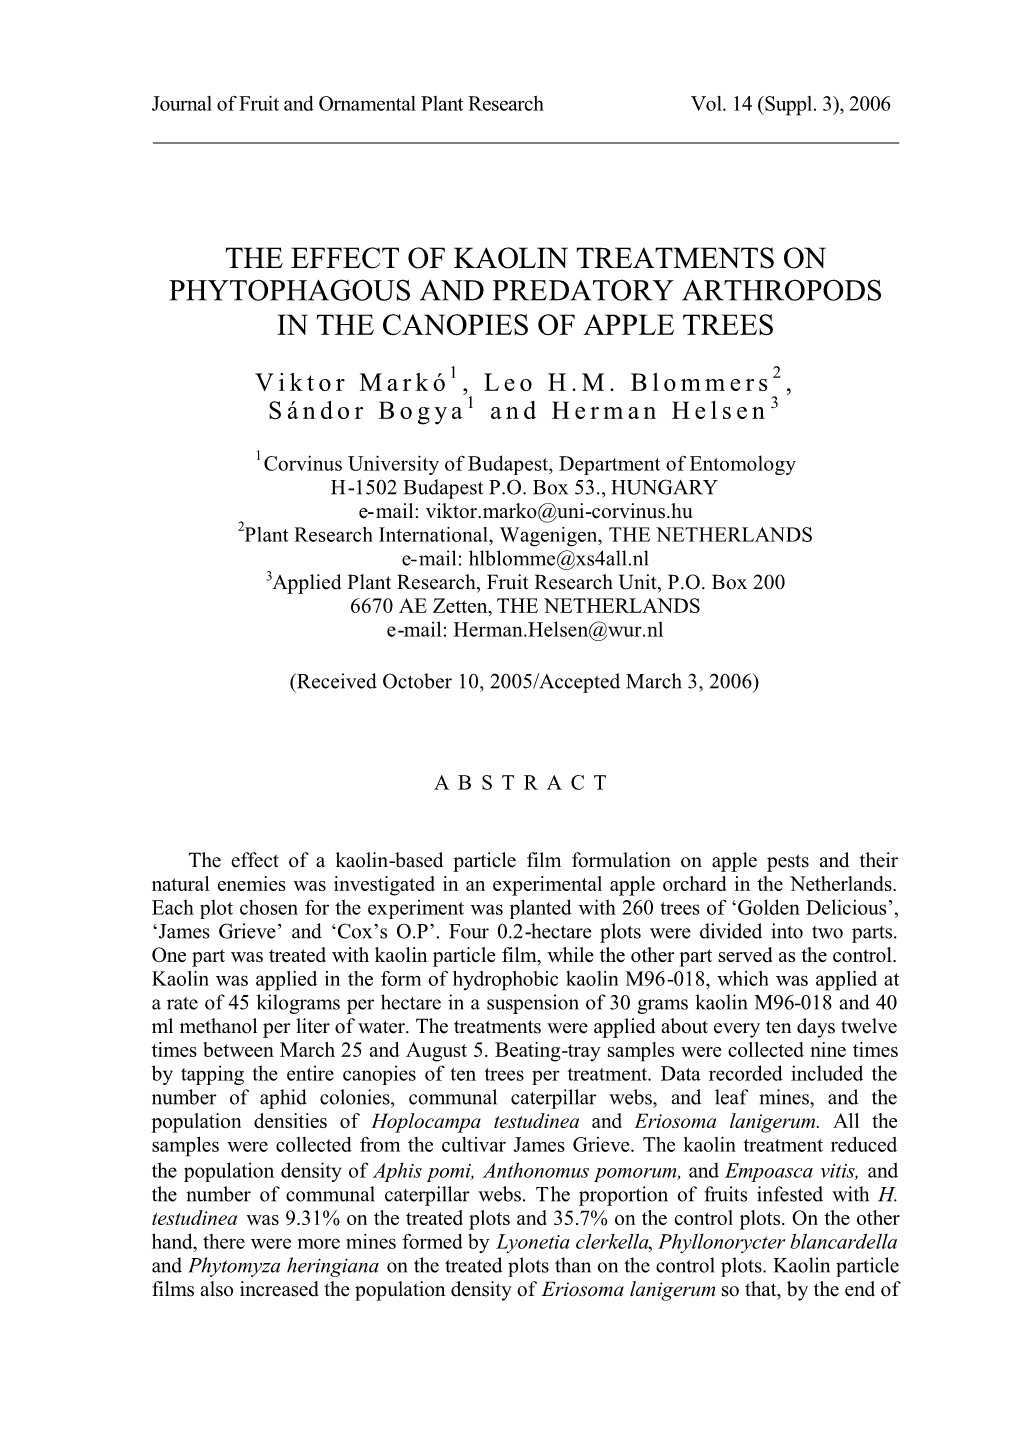 The Effect of Kaolin Treatments on Phytophagous and Predatory Arthropods in the Canopies of Apple Trees